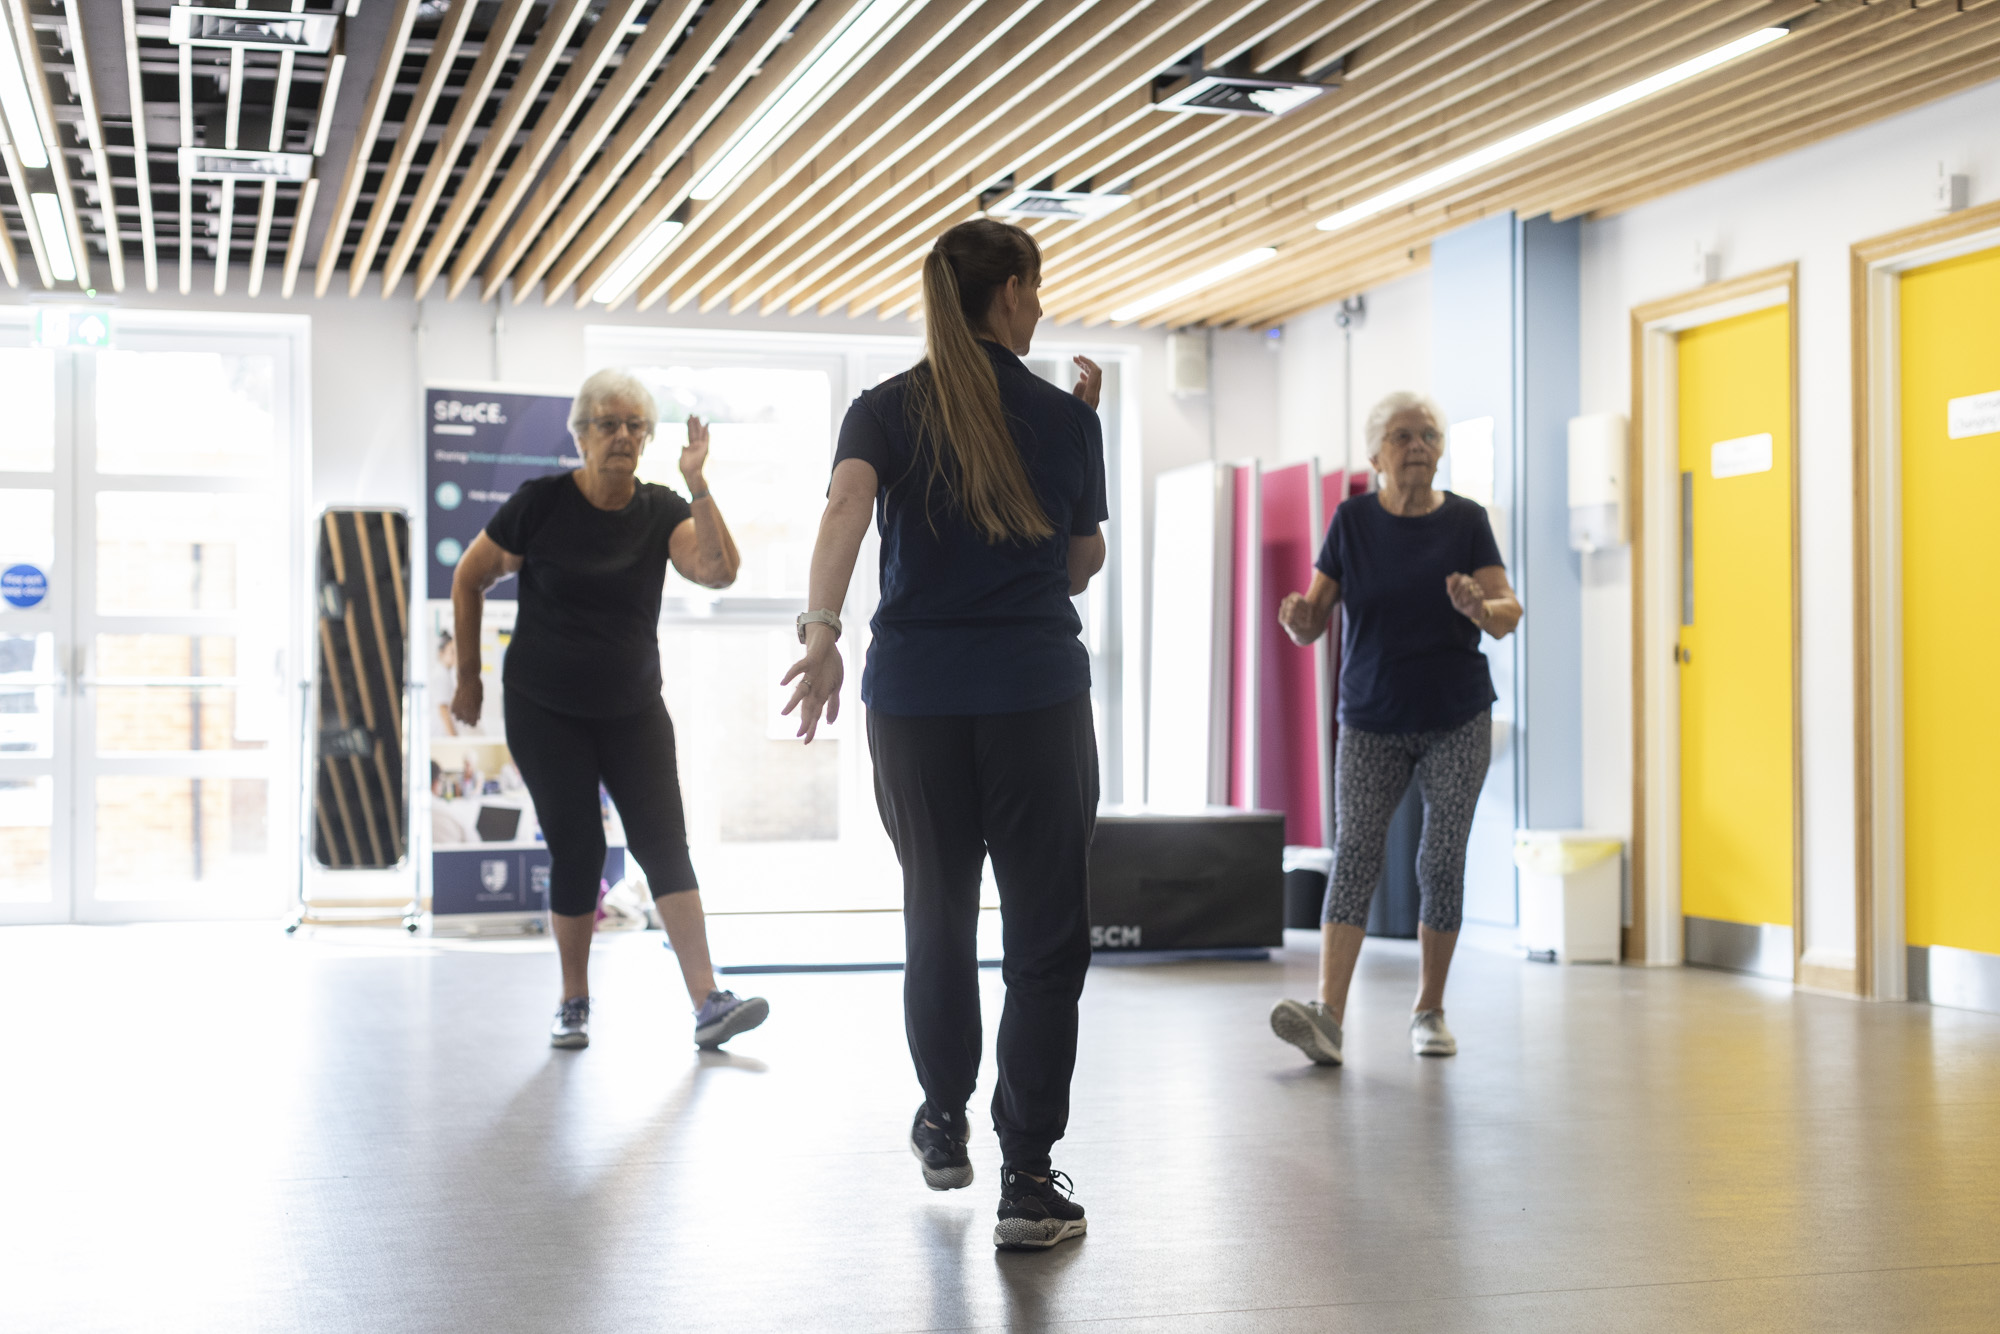 Sports Rehabilitator taking patients through a group exercise routine